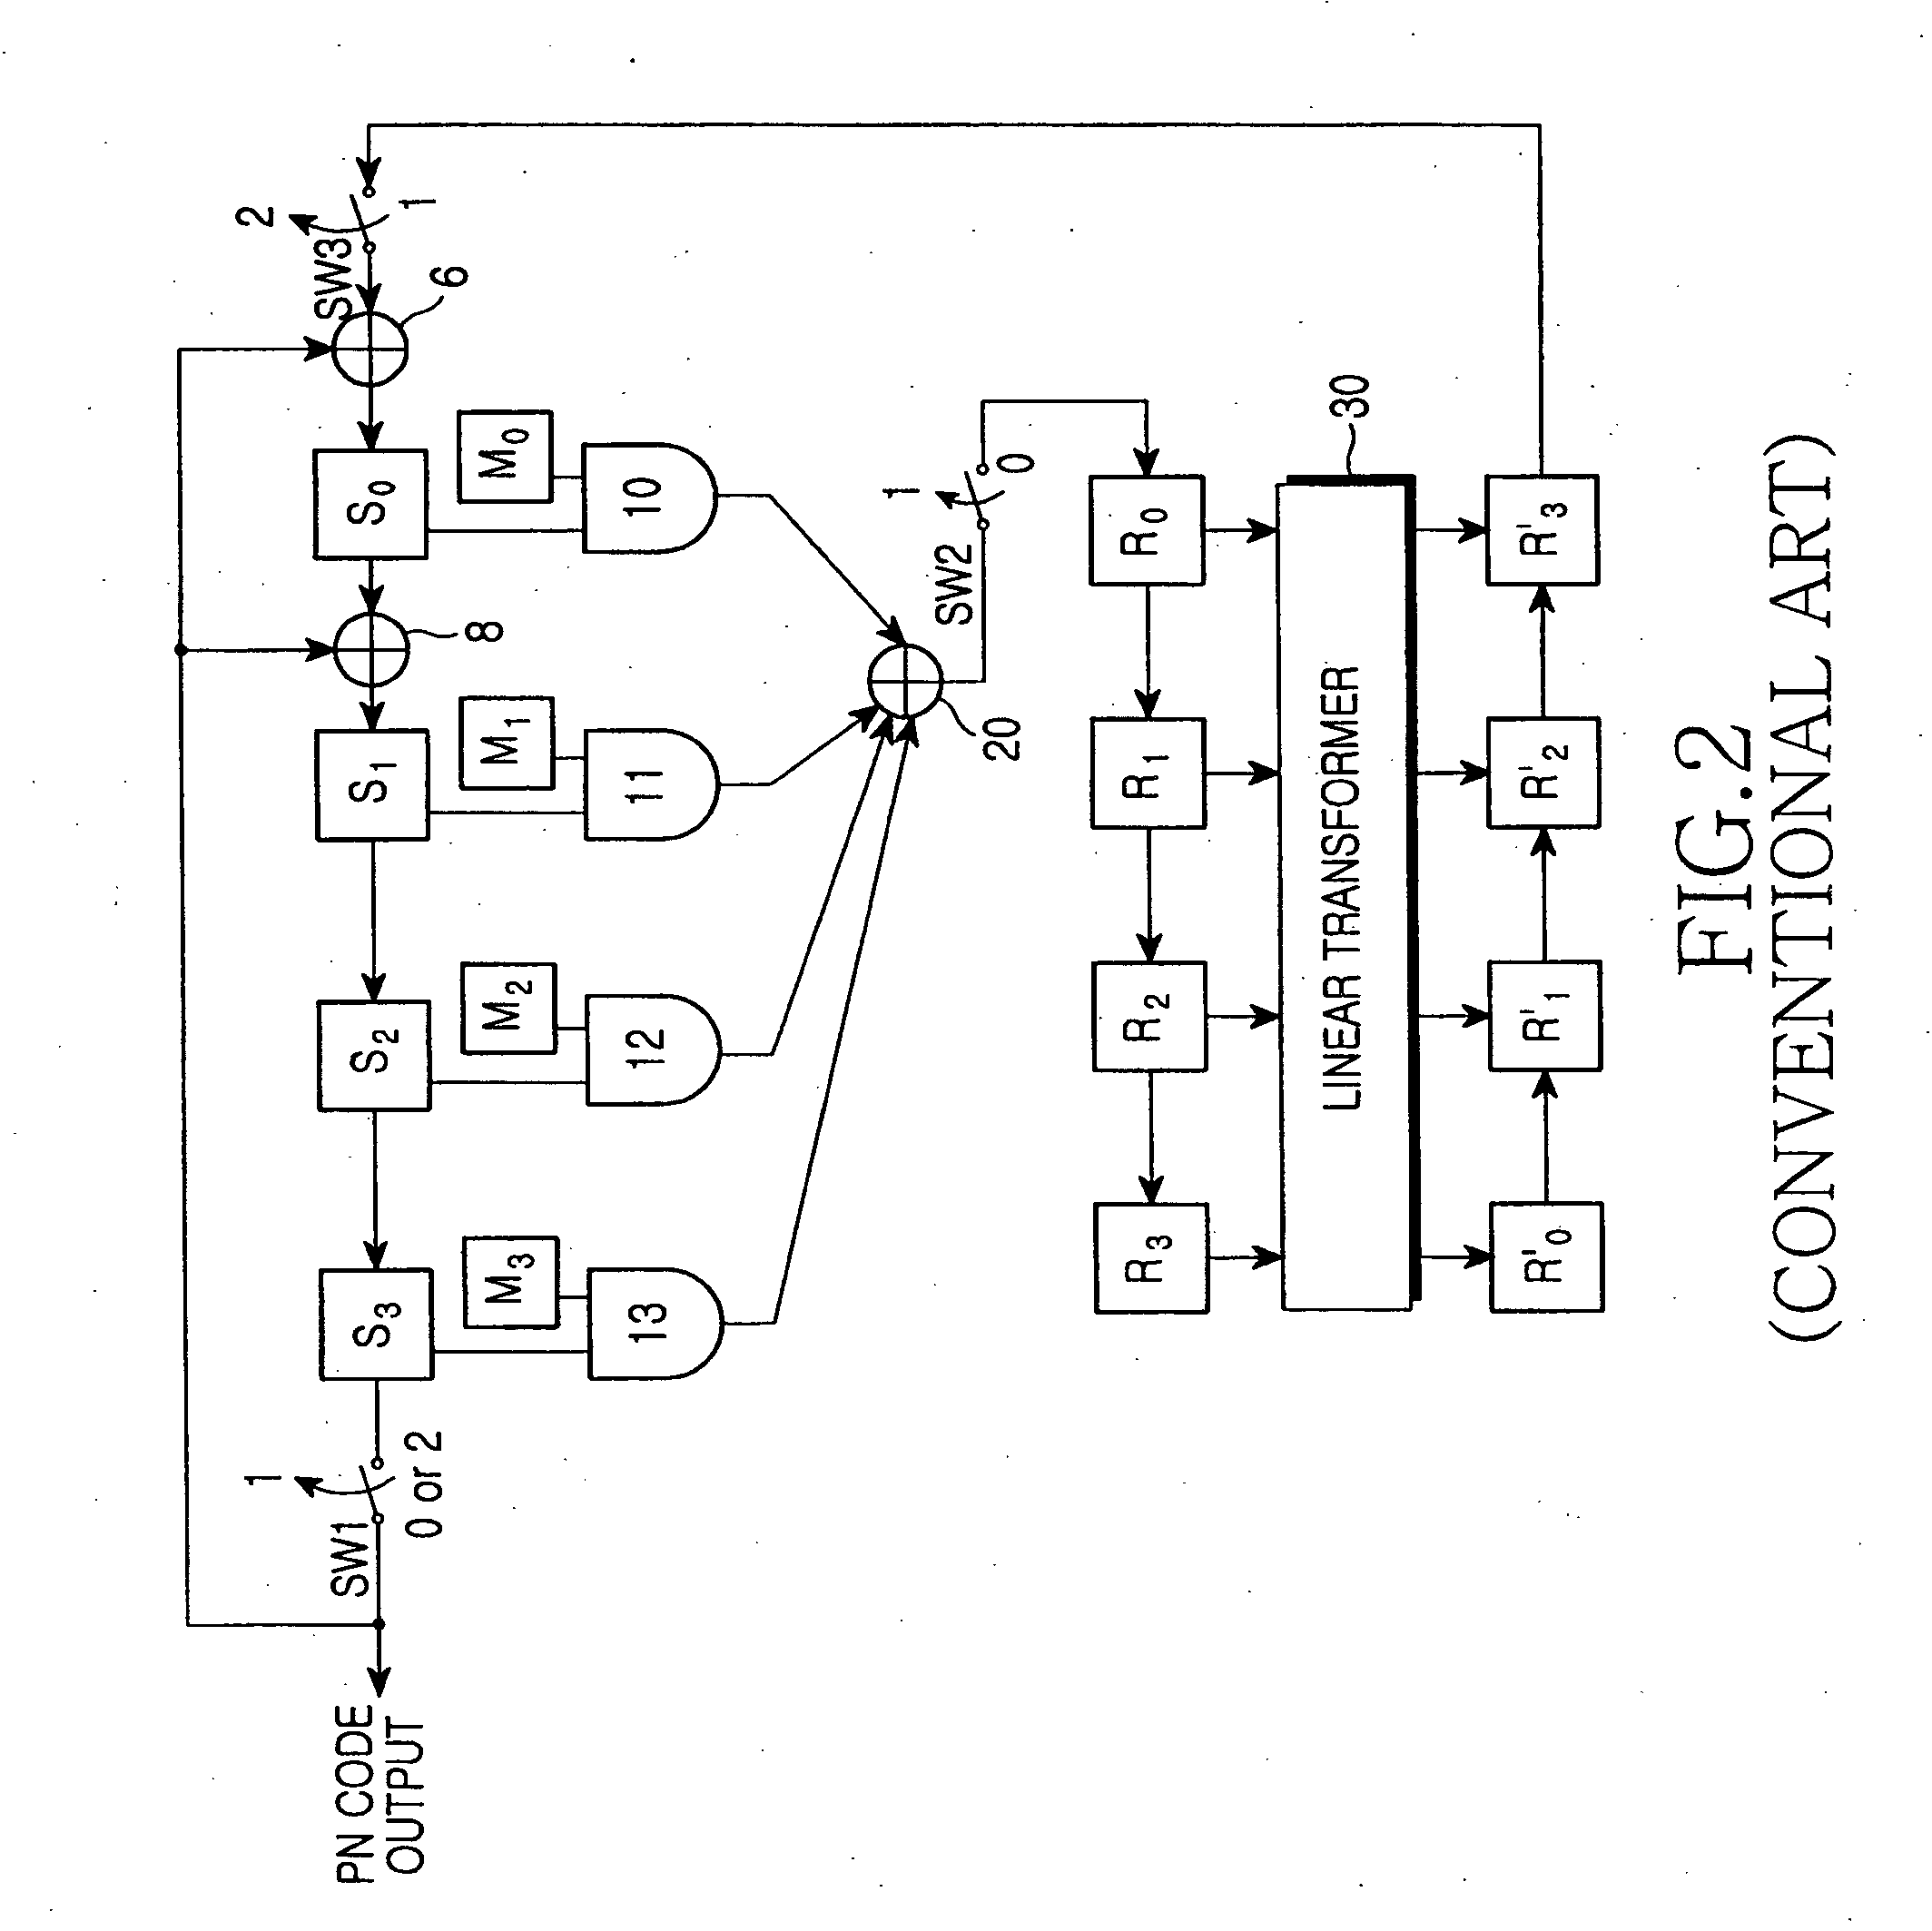 Method and apparatus for generating a pseudorandom binary sequence using a linear feedback shift register